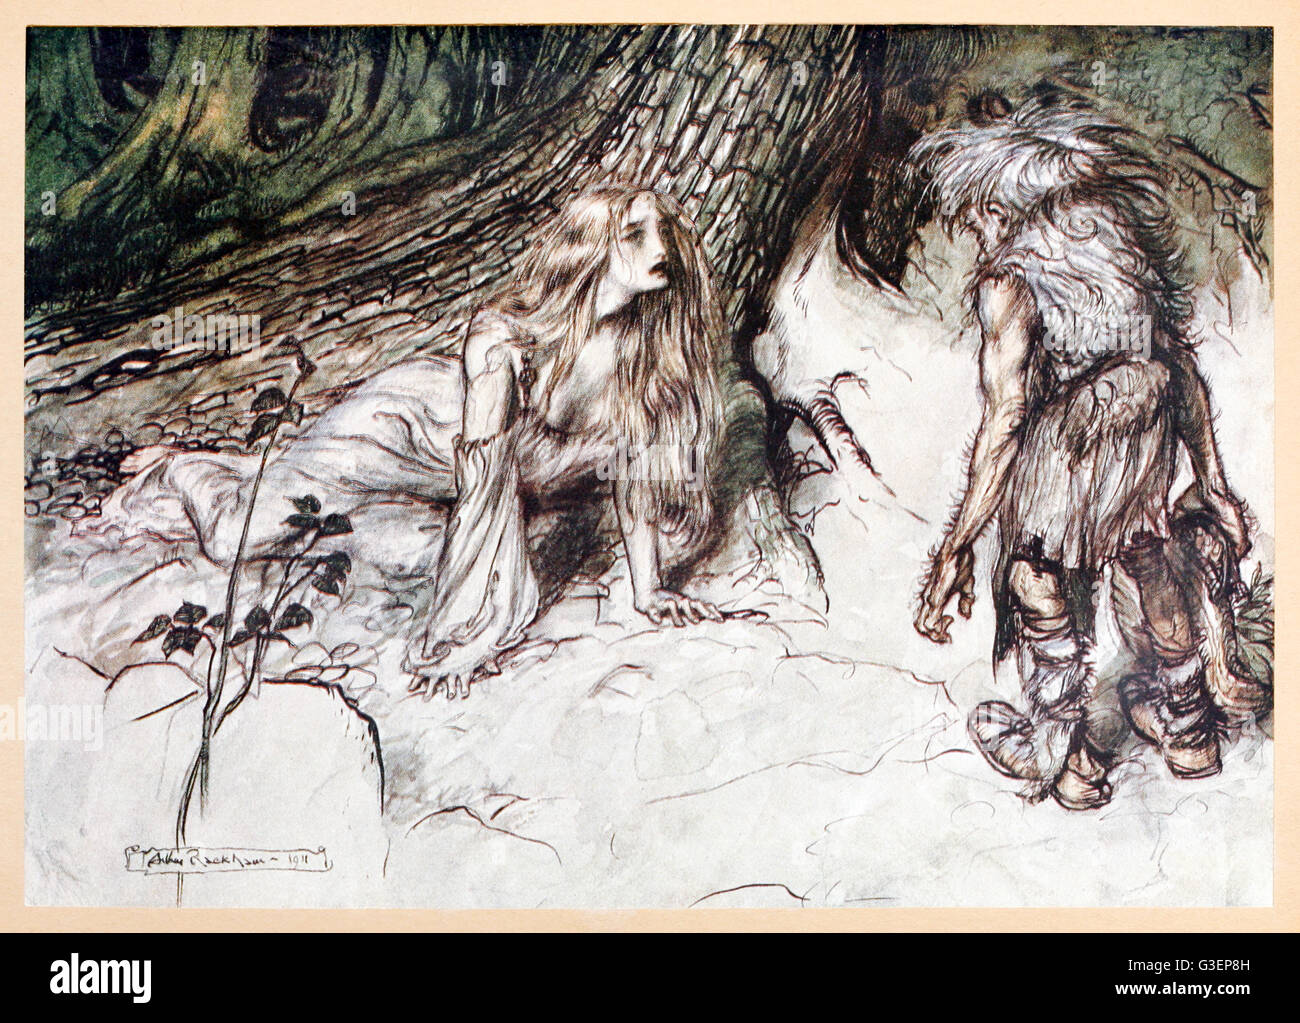 “Mime finds the mother of Siegried in the forest” from 'Siegfried & The Twilight of the Gods' illustrated by Arthur Rackham (1867-1939). See description for more information. Stock Photo